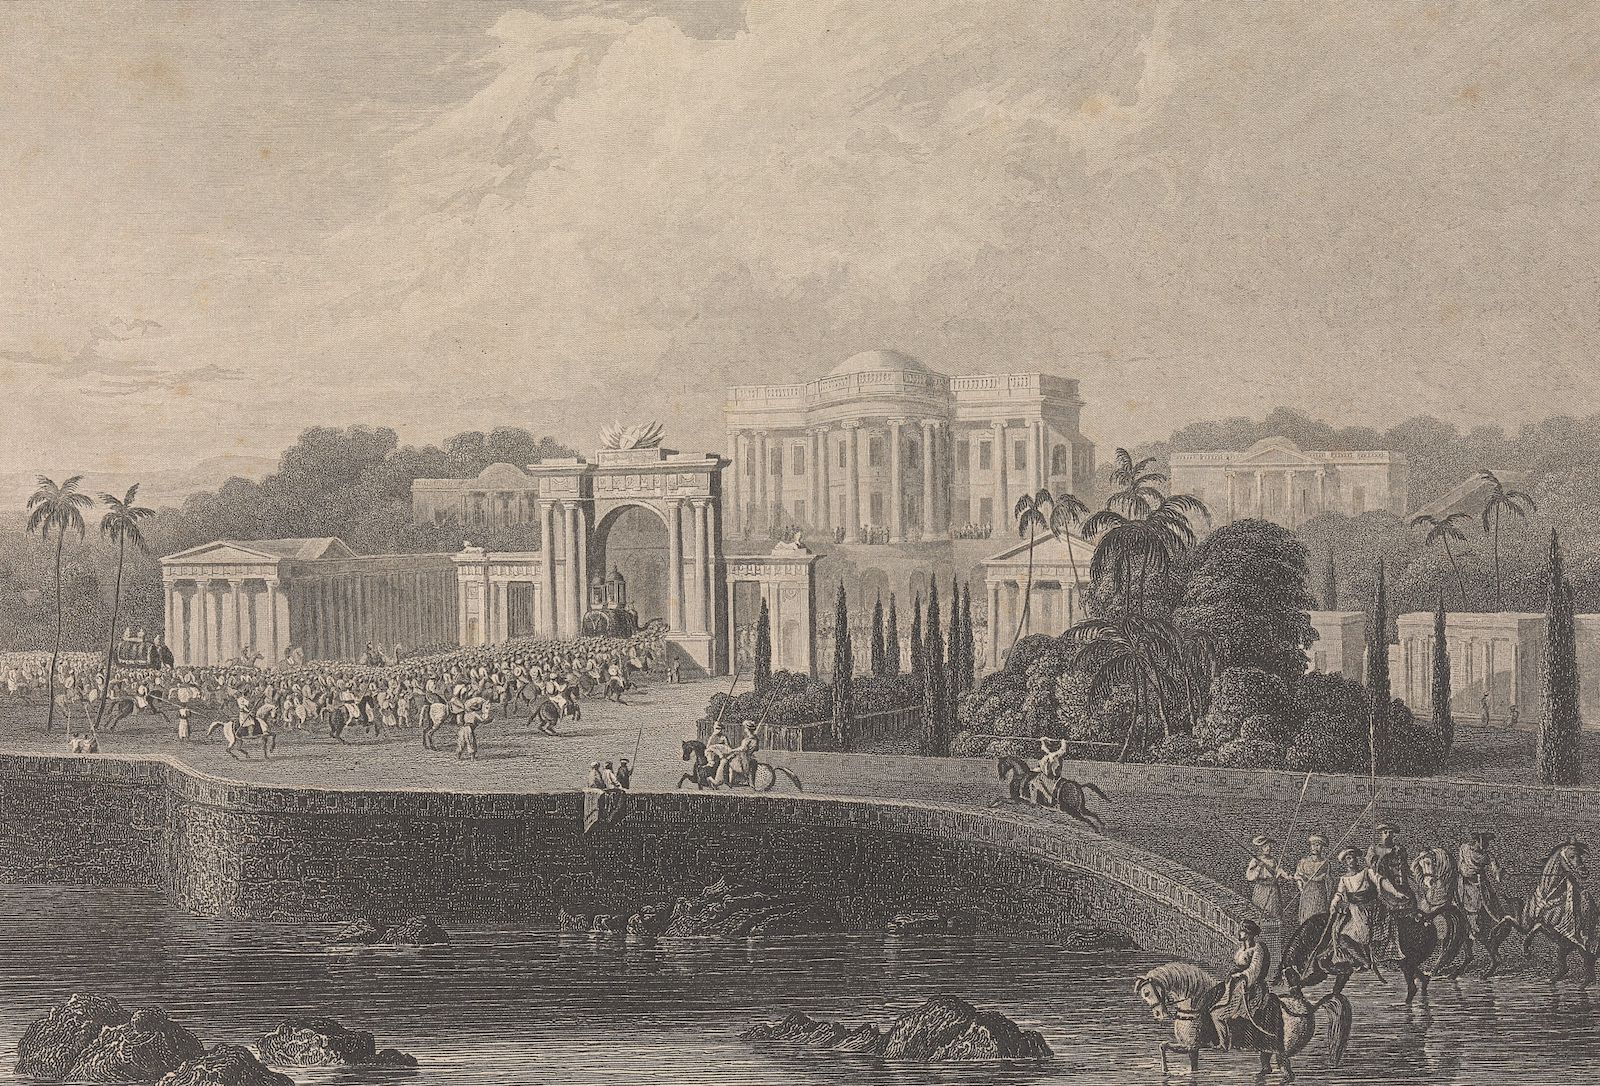 The British Residency in Hyderabad, c. 1845, engraved by William Miller from a drawing by Captain Robert Grindlay. Yale Center for British Art. Public Domain.